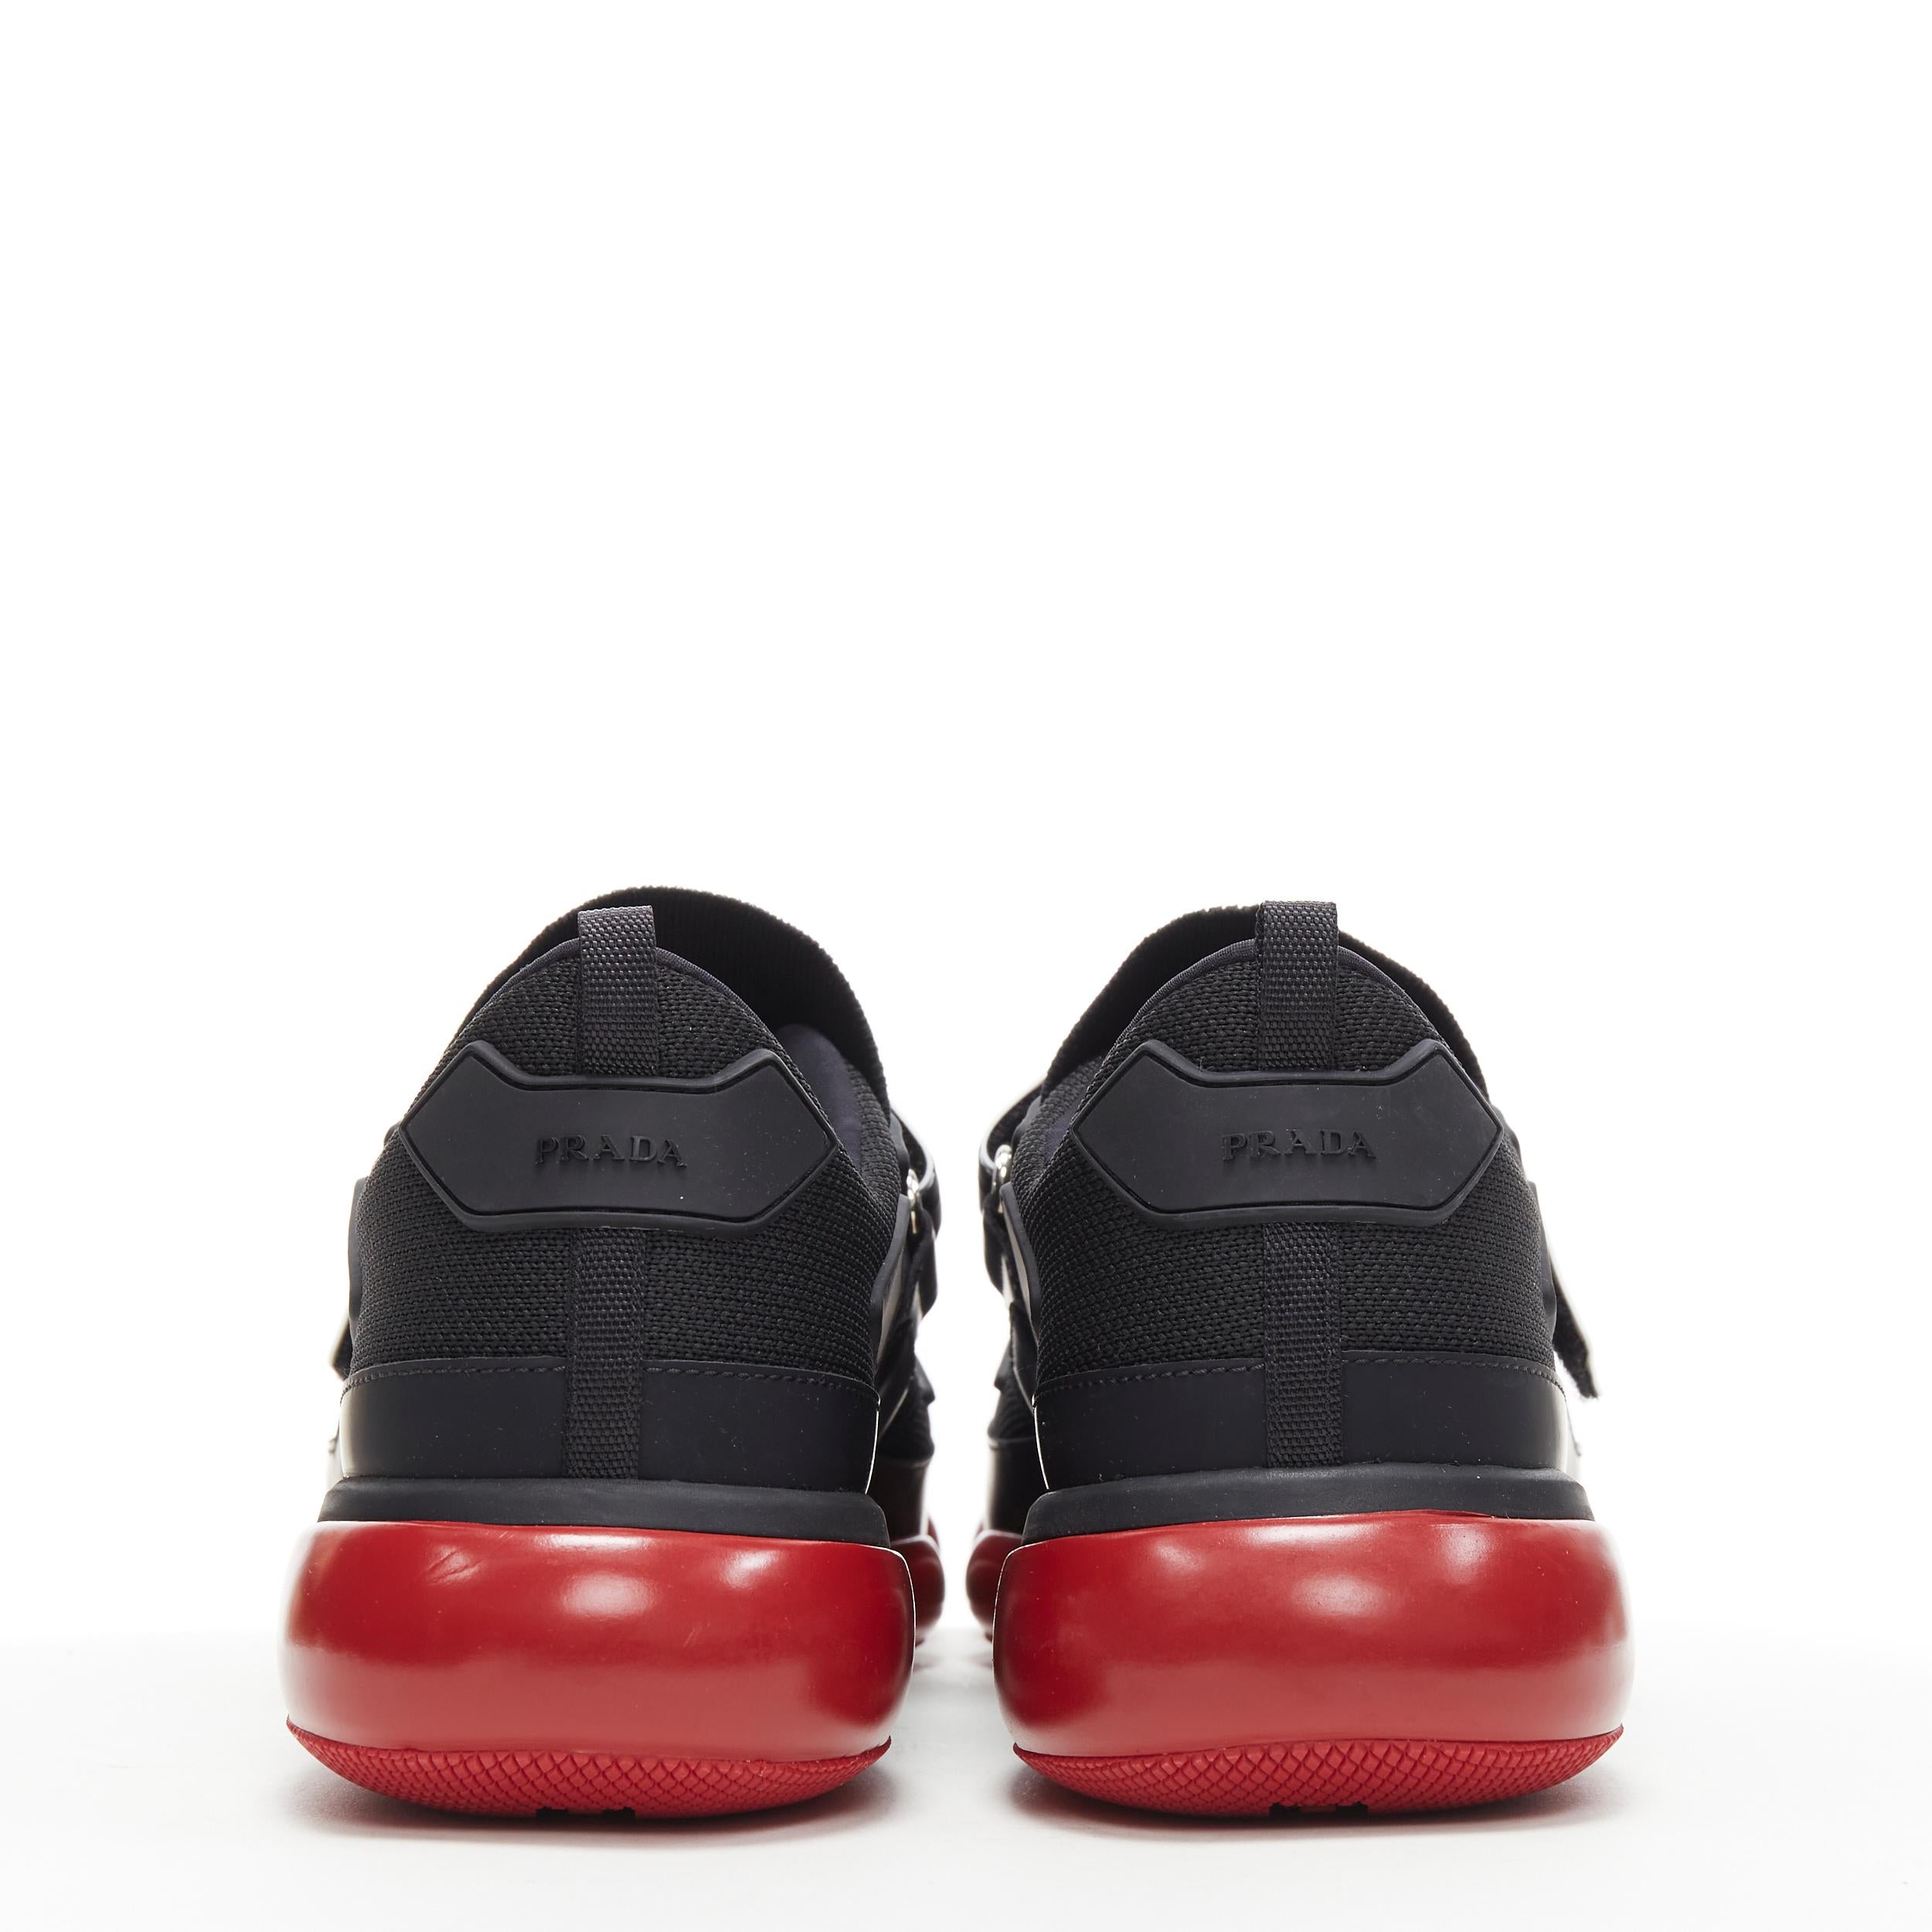 red and black prada shoes